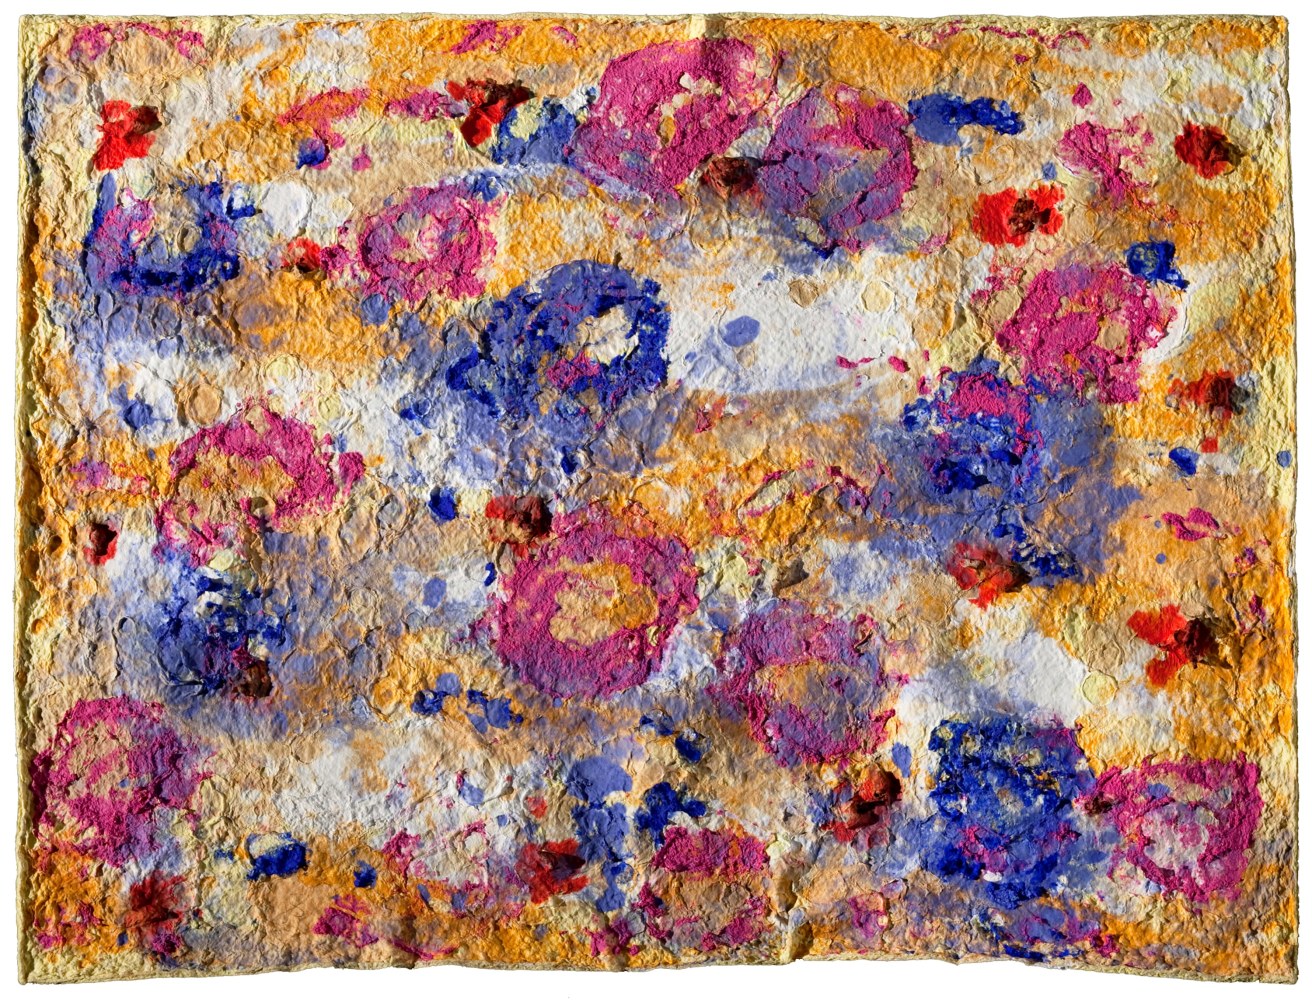 Large Flower Field,&amp;nbsp;2011
Joan Snyder (American, b. 1940)&amp;nbsp;

Handmade paper pulp painting with inclusion of natural matter, mounted on board
27&amp;quot; x 35 &amp;frac12;&amp;quot; x 1 &amp;frac12;&amp;quot;
Final impression, unique variant from an edition of 16 paintings
$5000

Published by the Brodsky Center at PAFA, Philadelphia

PURCHASE